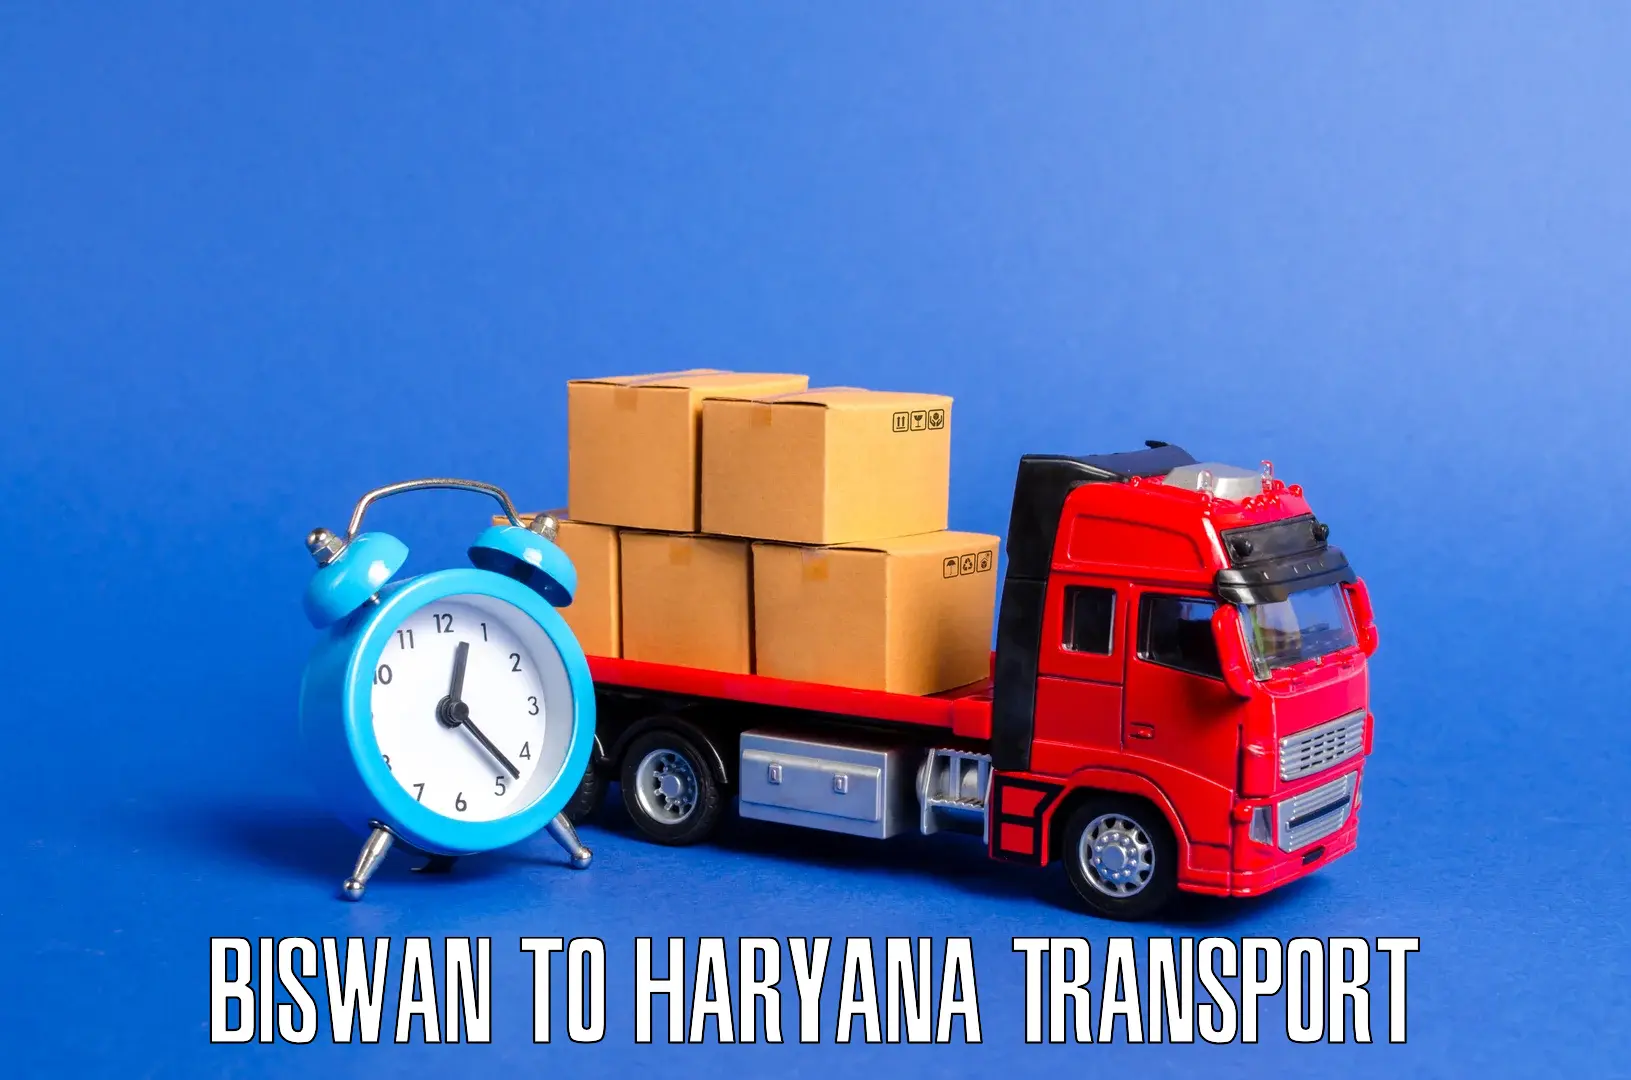 Domestic transport services Biswan to Gurgaon